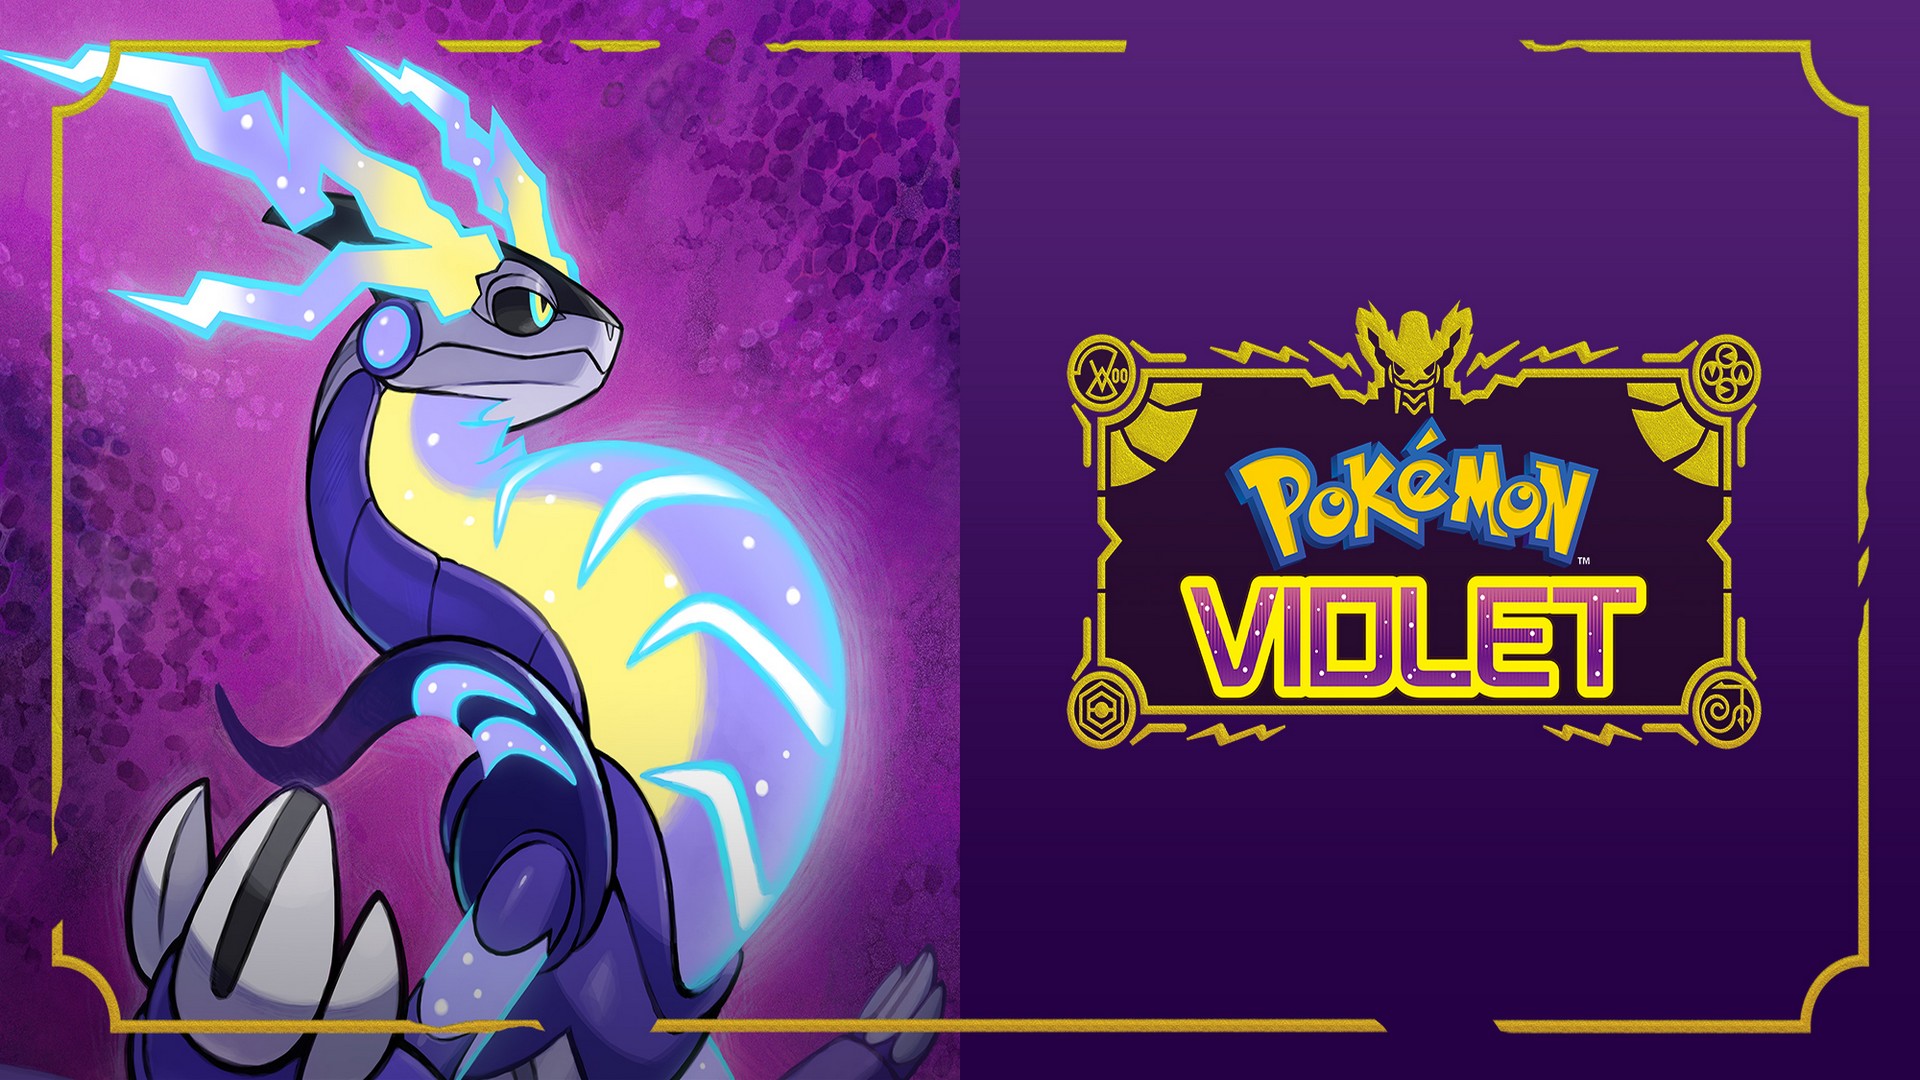 New Pokemon Scarlet and Violet Coin Pokemon has been leaked and teased